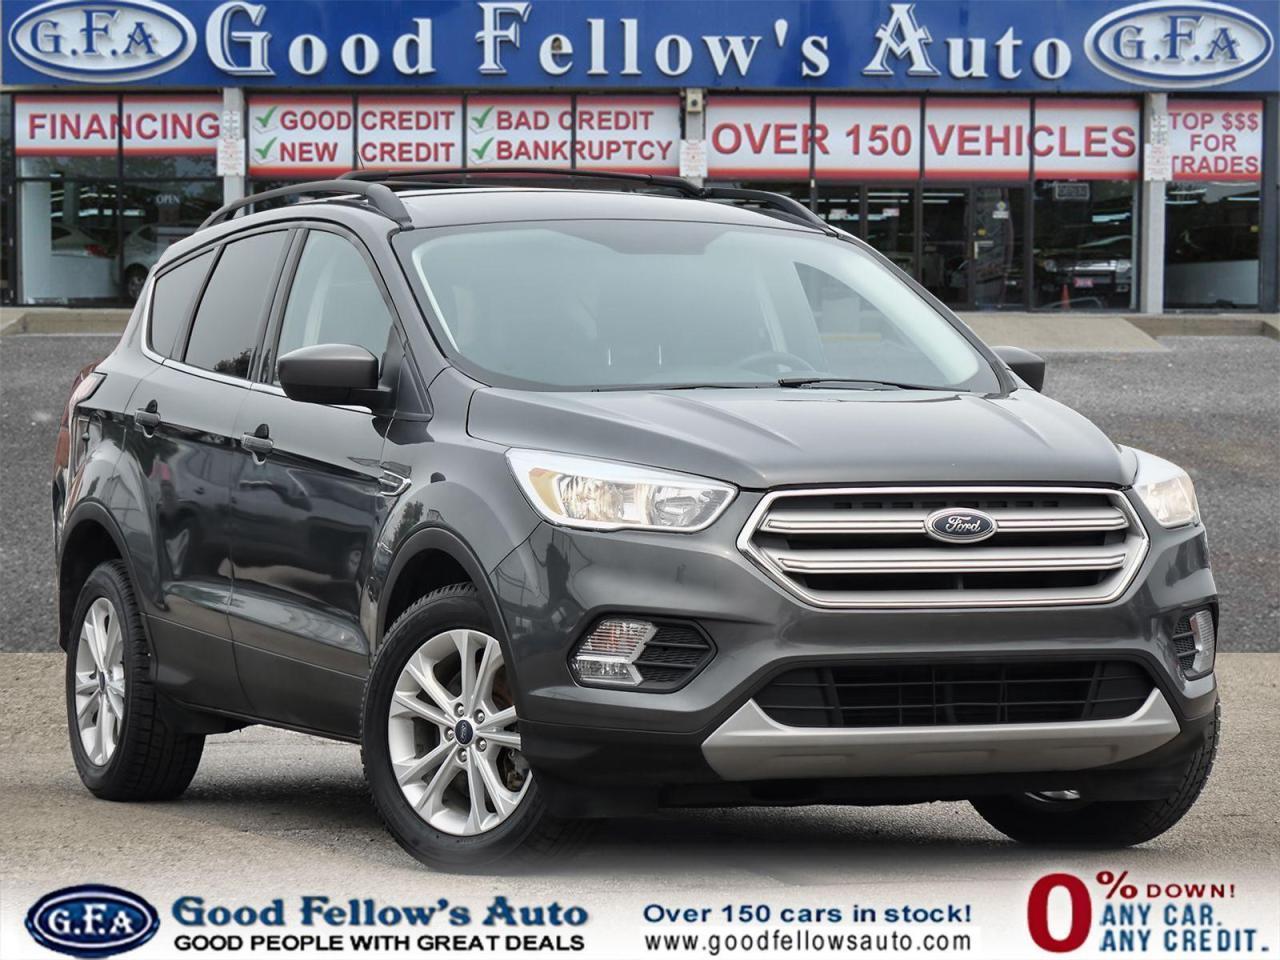 2018 Ford Escape SE MODEL, ECOBOOST, AWD, REARVIEW CAMERA, HEATED S - Photo #1